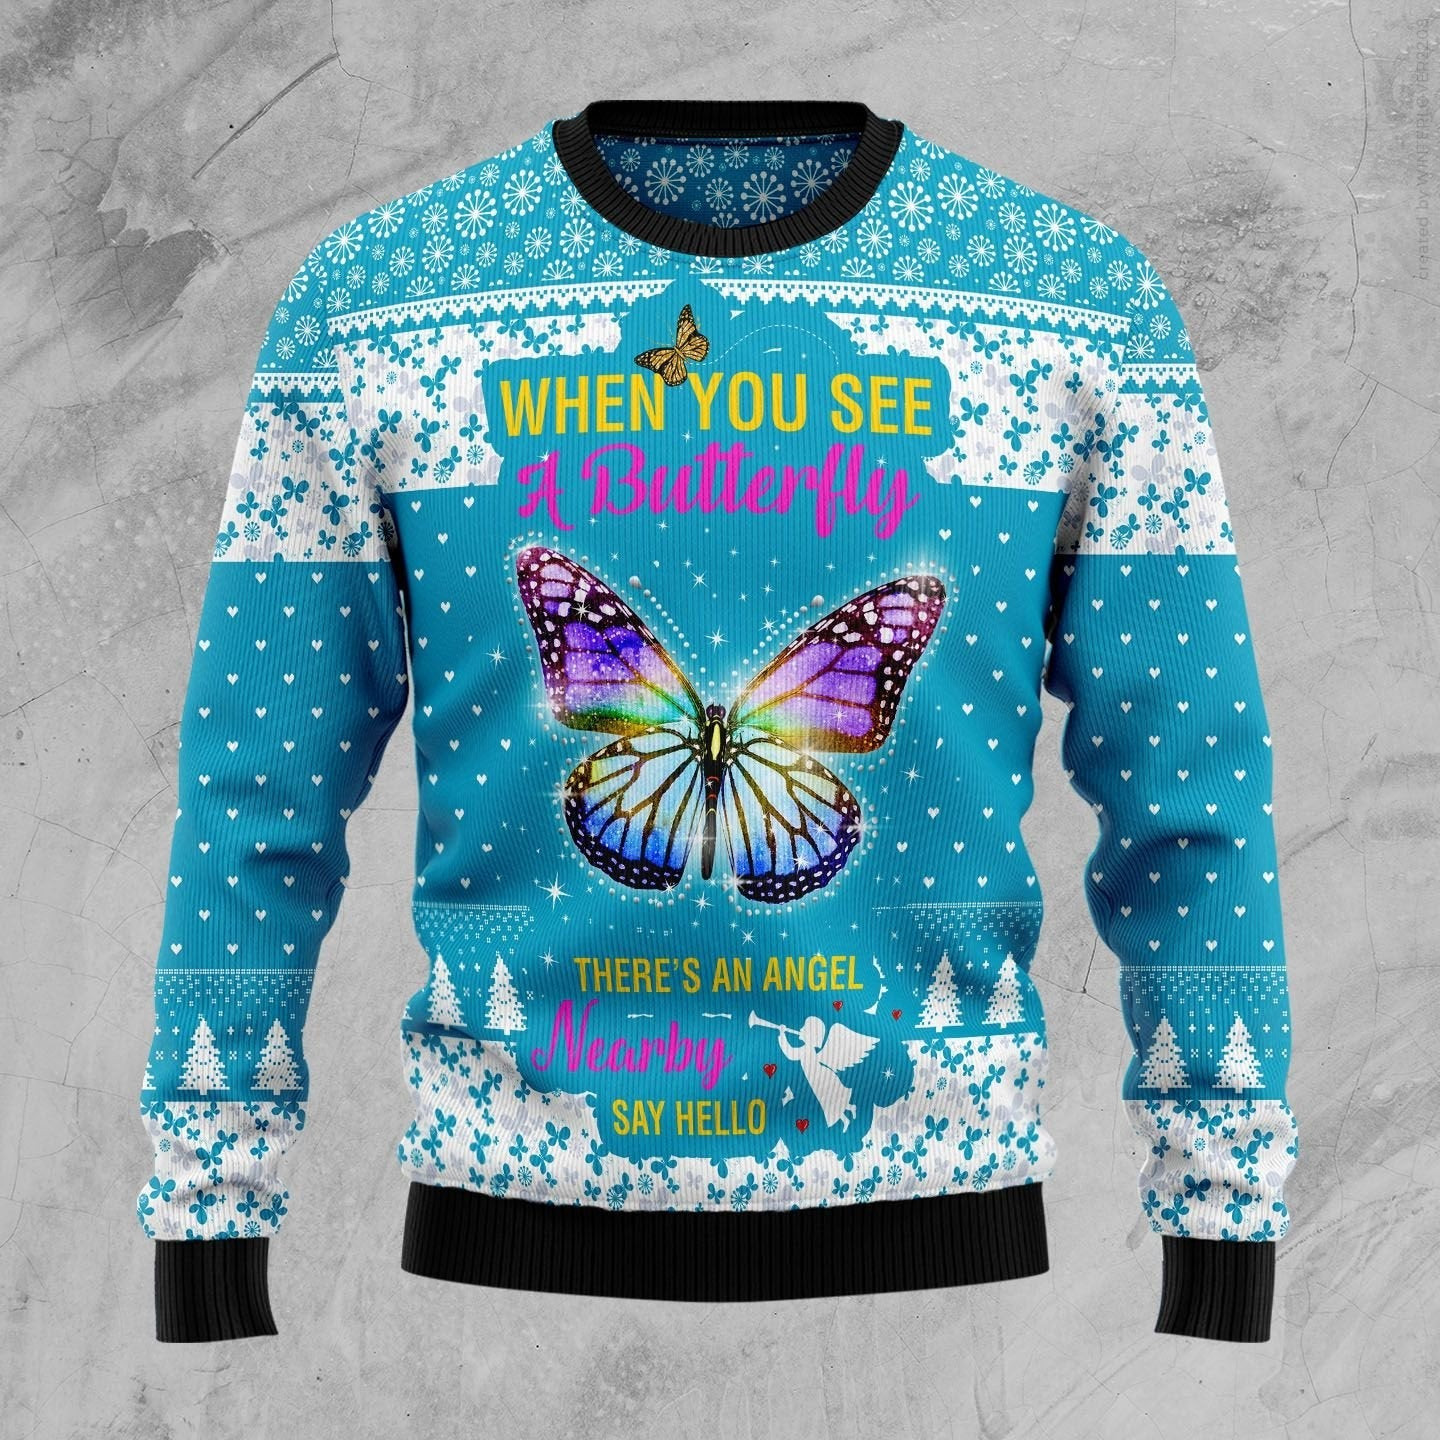 Butterfly Nearby Say Hello Ugly Christmas Sweater Ugly Sweater For Men Women